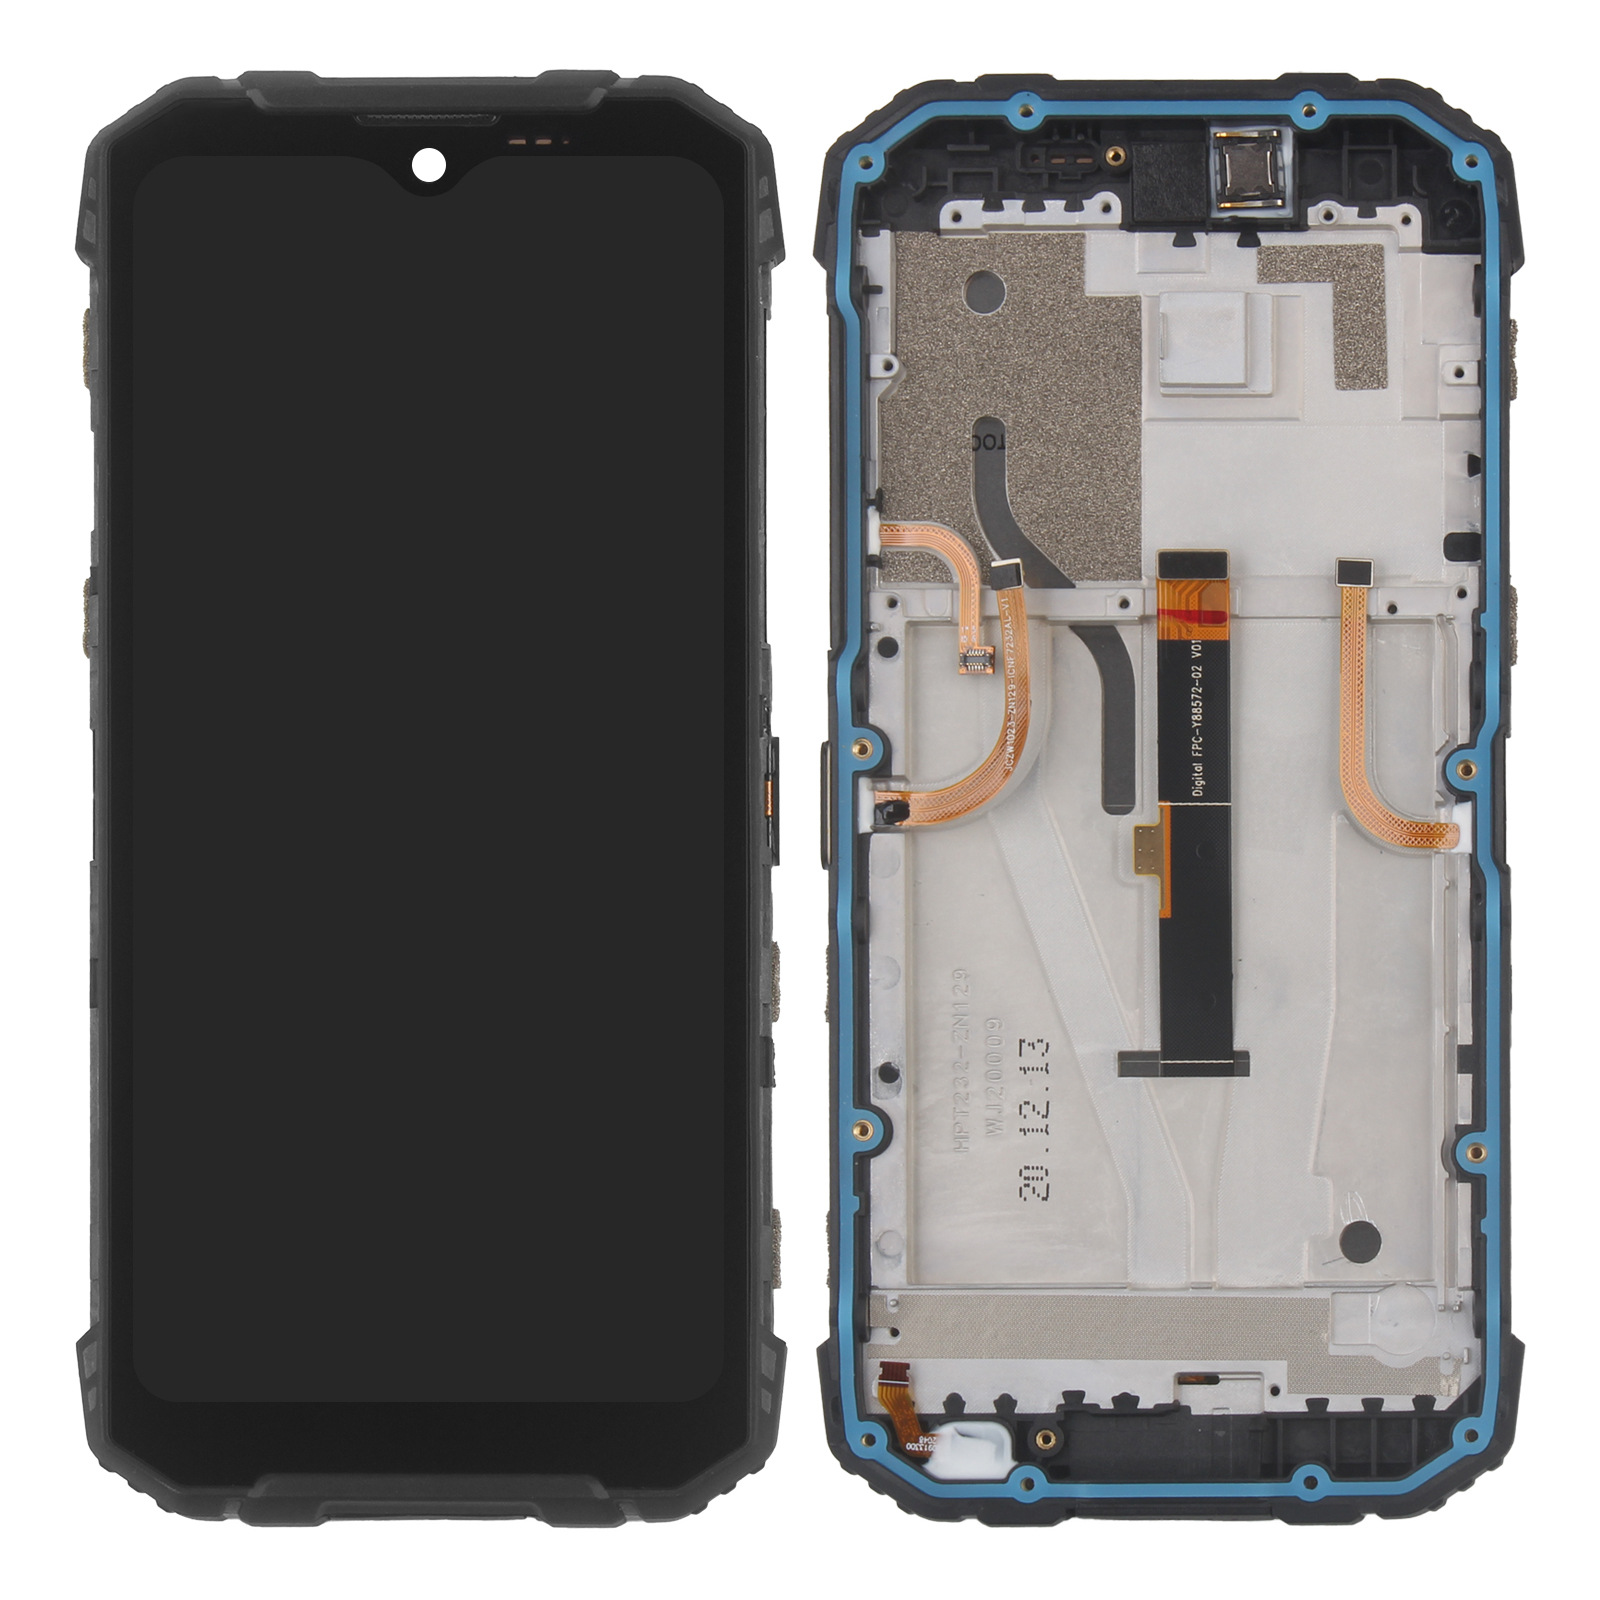 DOOGEE-Original-for-Doogee-S96-Pro-LCD-Display--Touch-Screen-Digitizer-Assembly-Replacement-Parts-wi-1868571-7